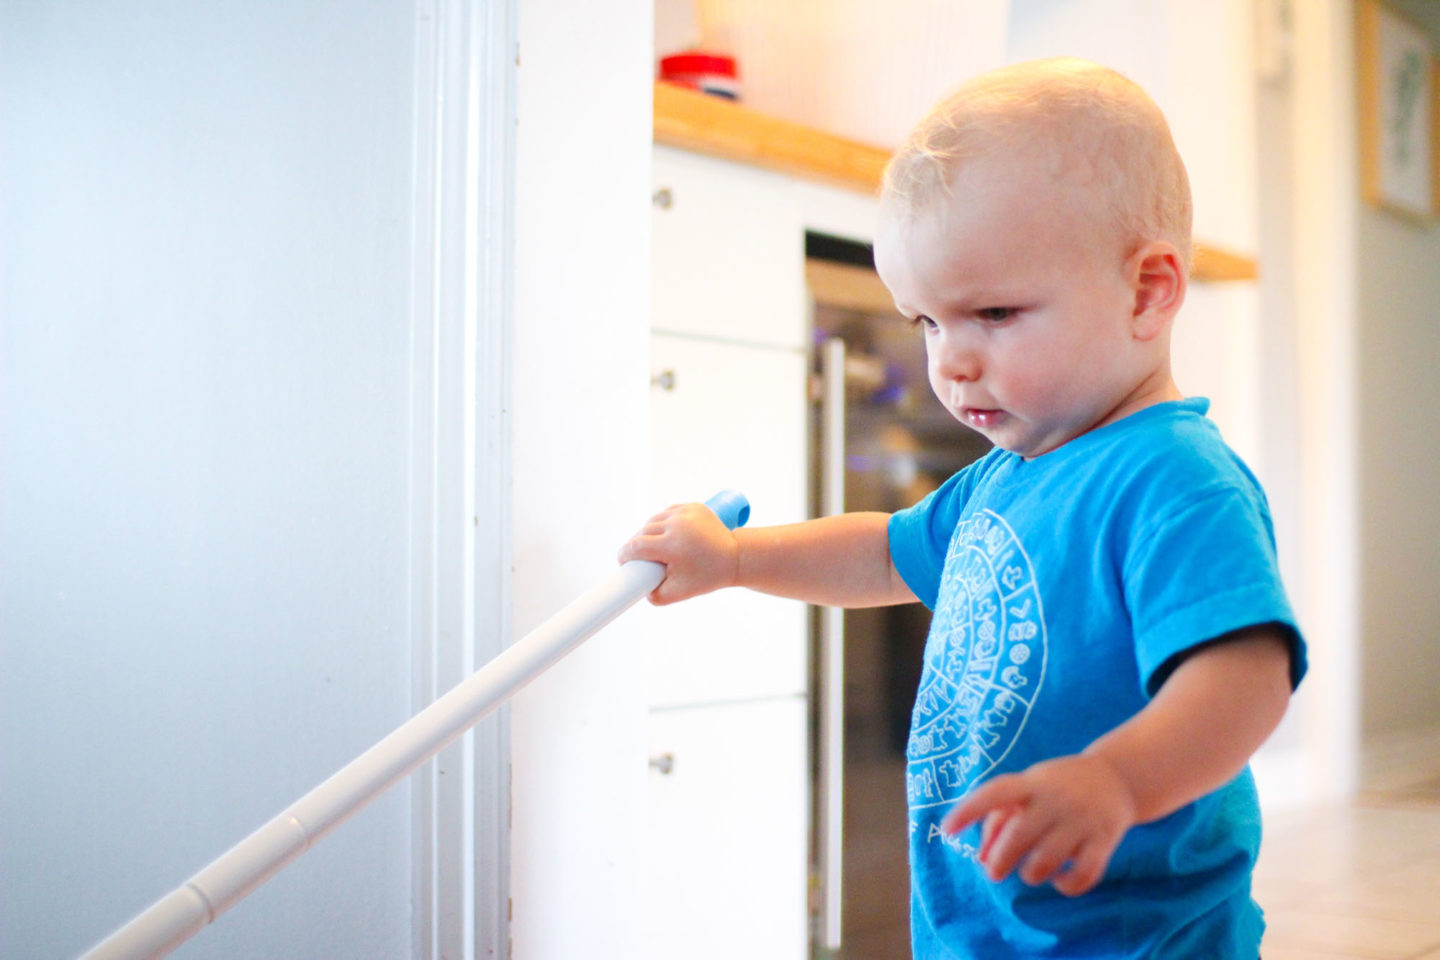 Toddler mopping the floor exhibiting Montessori education in the home.